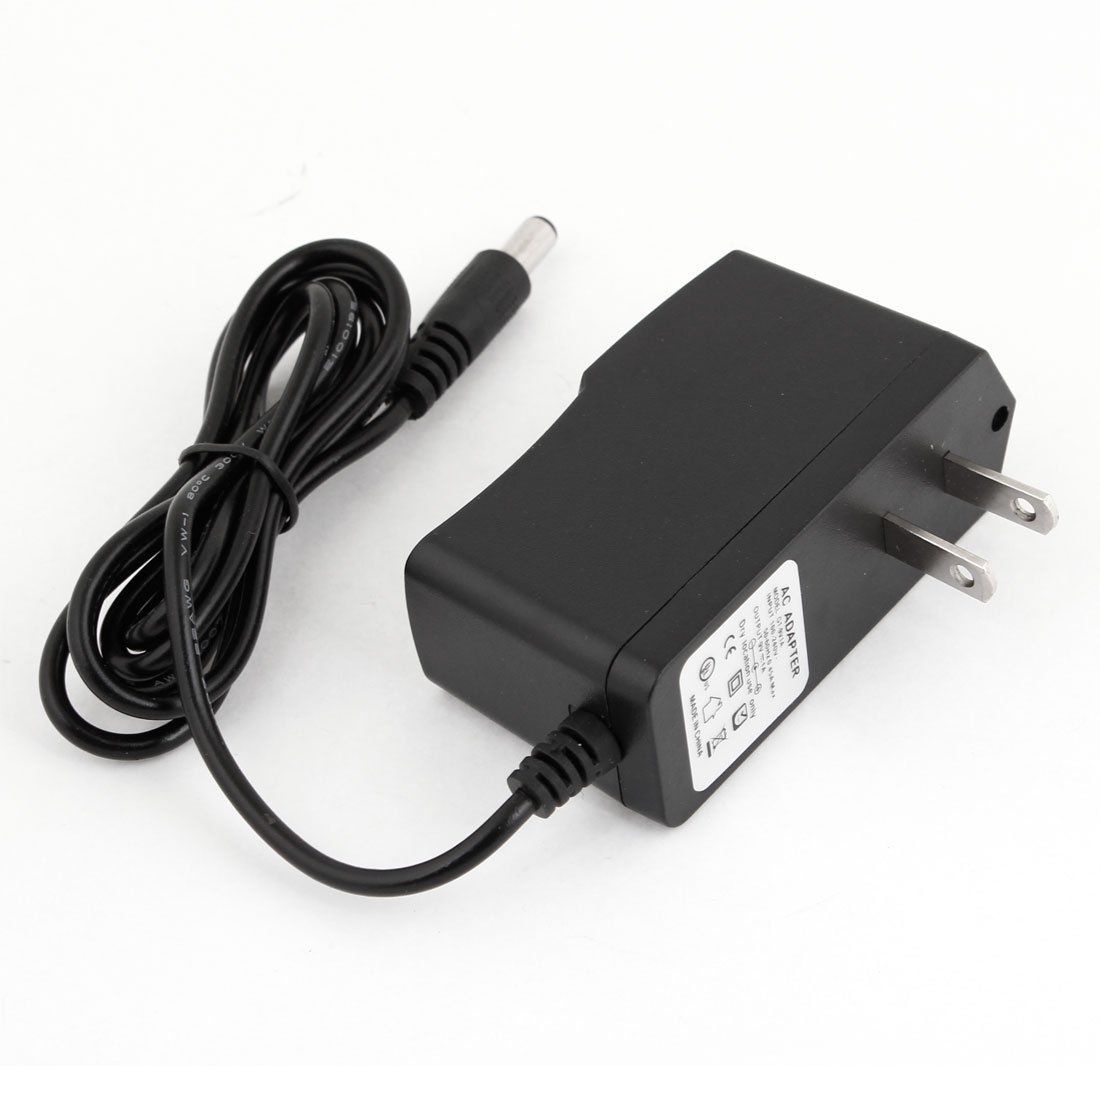 BestCH AC/DC Adapter for Evenflo Model: 2951 Feeding Advanced Double Electric Breast Pump Power Supply Cord Cable PS Wall Home Charger